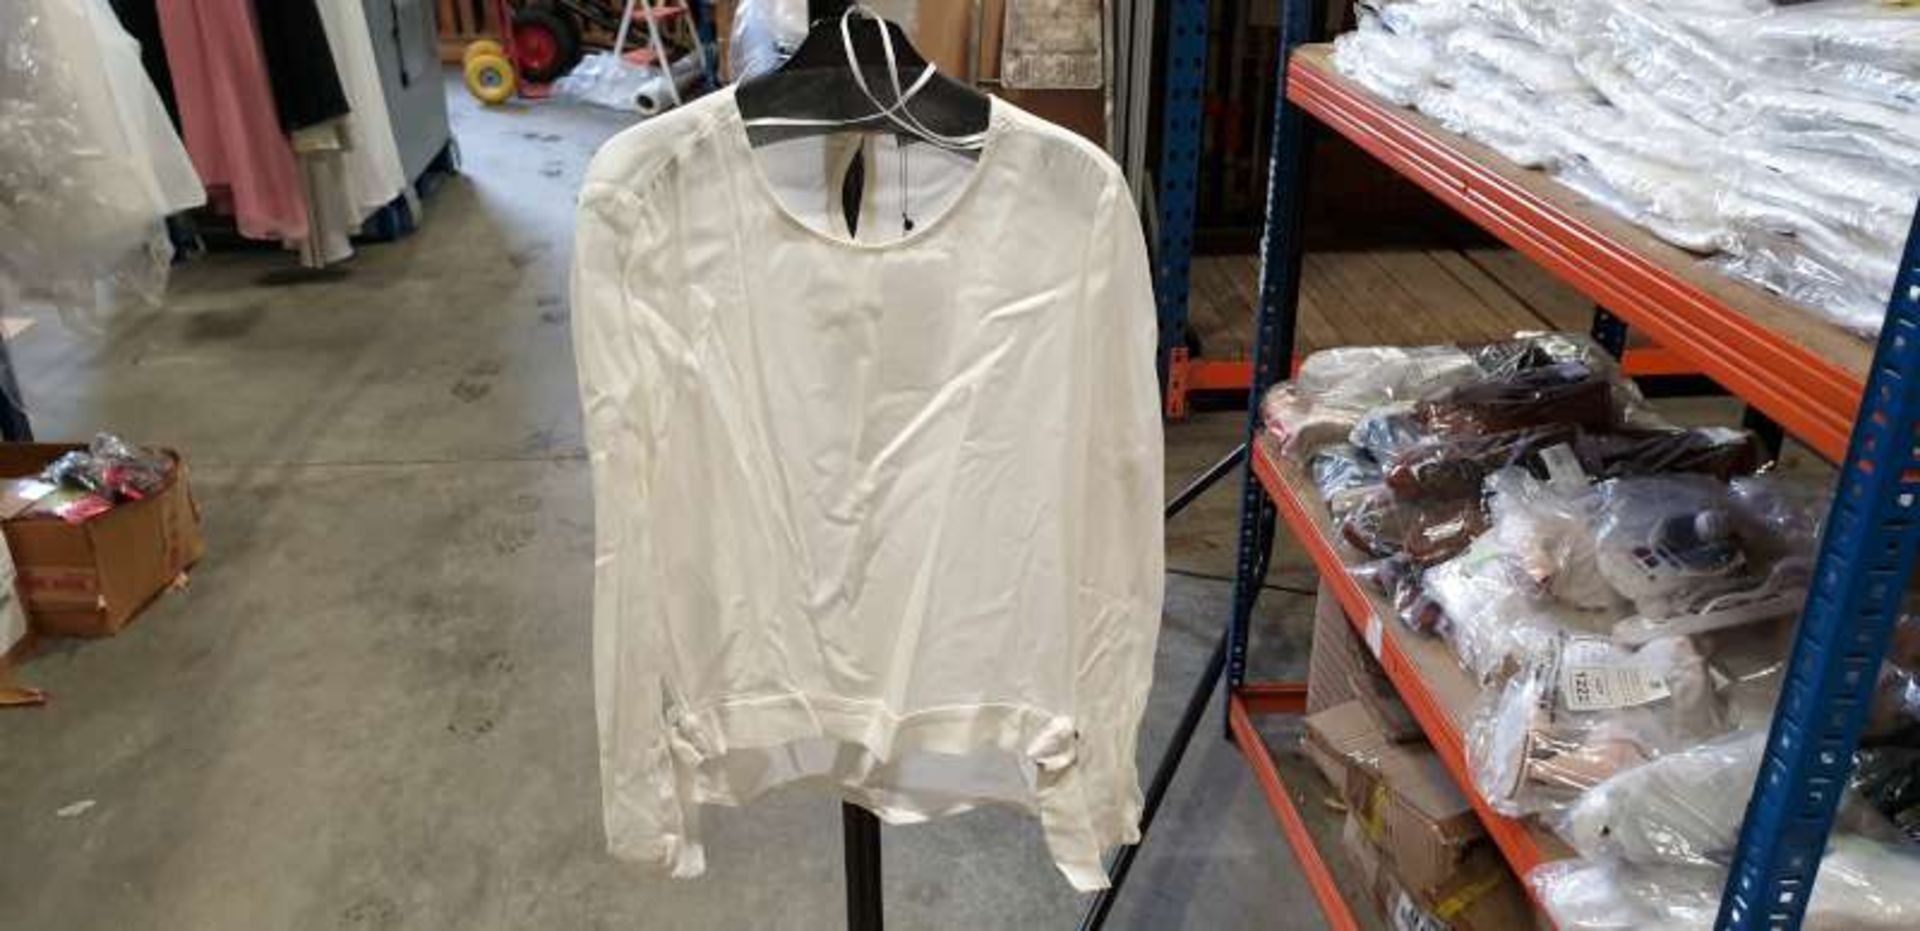 20 X BRAND NEW MANGO WHITE TOPS IN SIZES 8 / 6, RRP OF EACH ITEM £29.99